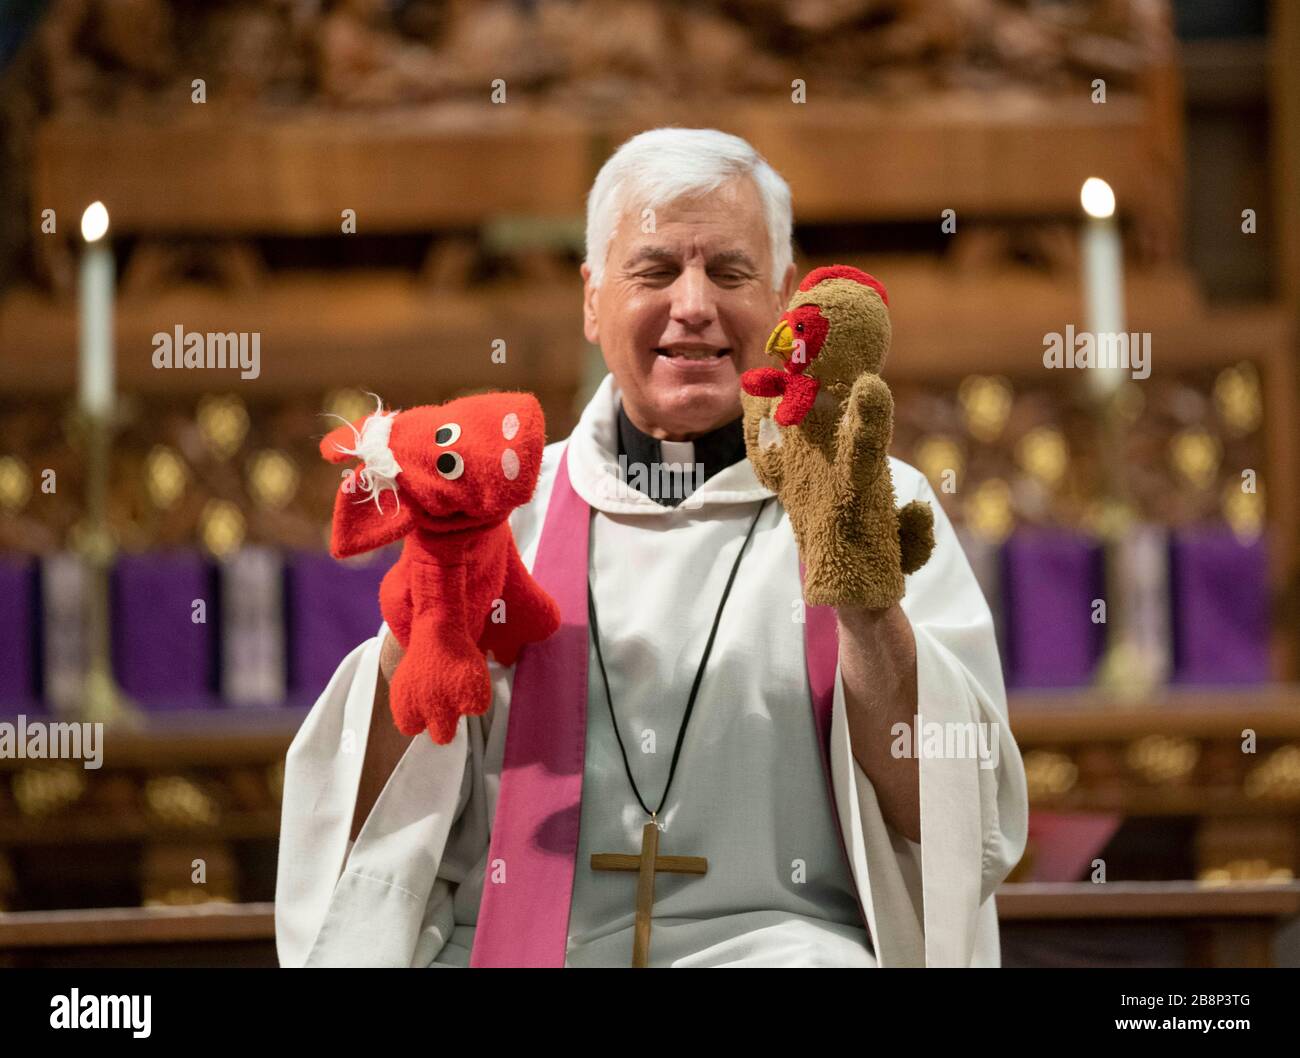 Austin, TX USA March 22, 2020: Pastor John Van Haneghan of Saint Martin's Lutheran Church performs a children's message with puppets to an empty sanctuary that would normally hold several hundred worshipers on a Sunday morning in downtown Austin. The church is offering online services while crowd restrictions are in place due to the coronavirus pandemic. Credit: Bob Daemmrich/Alamy Live News Stock Photo